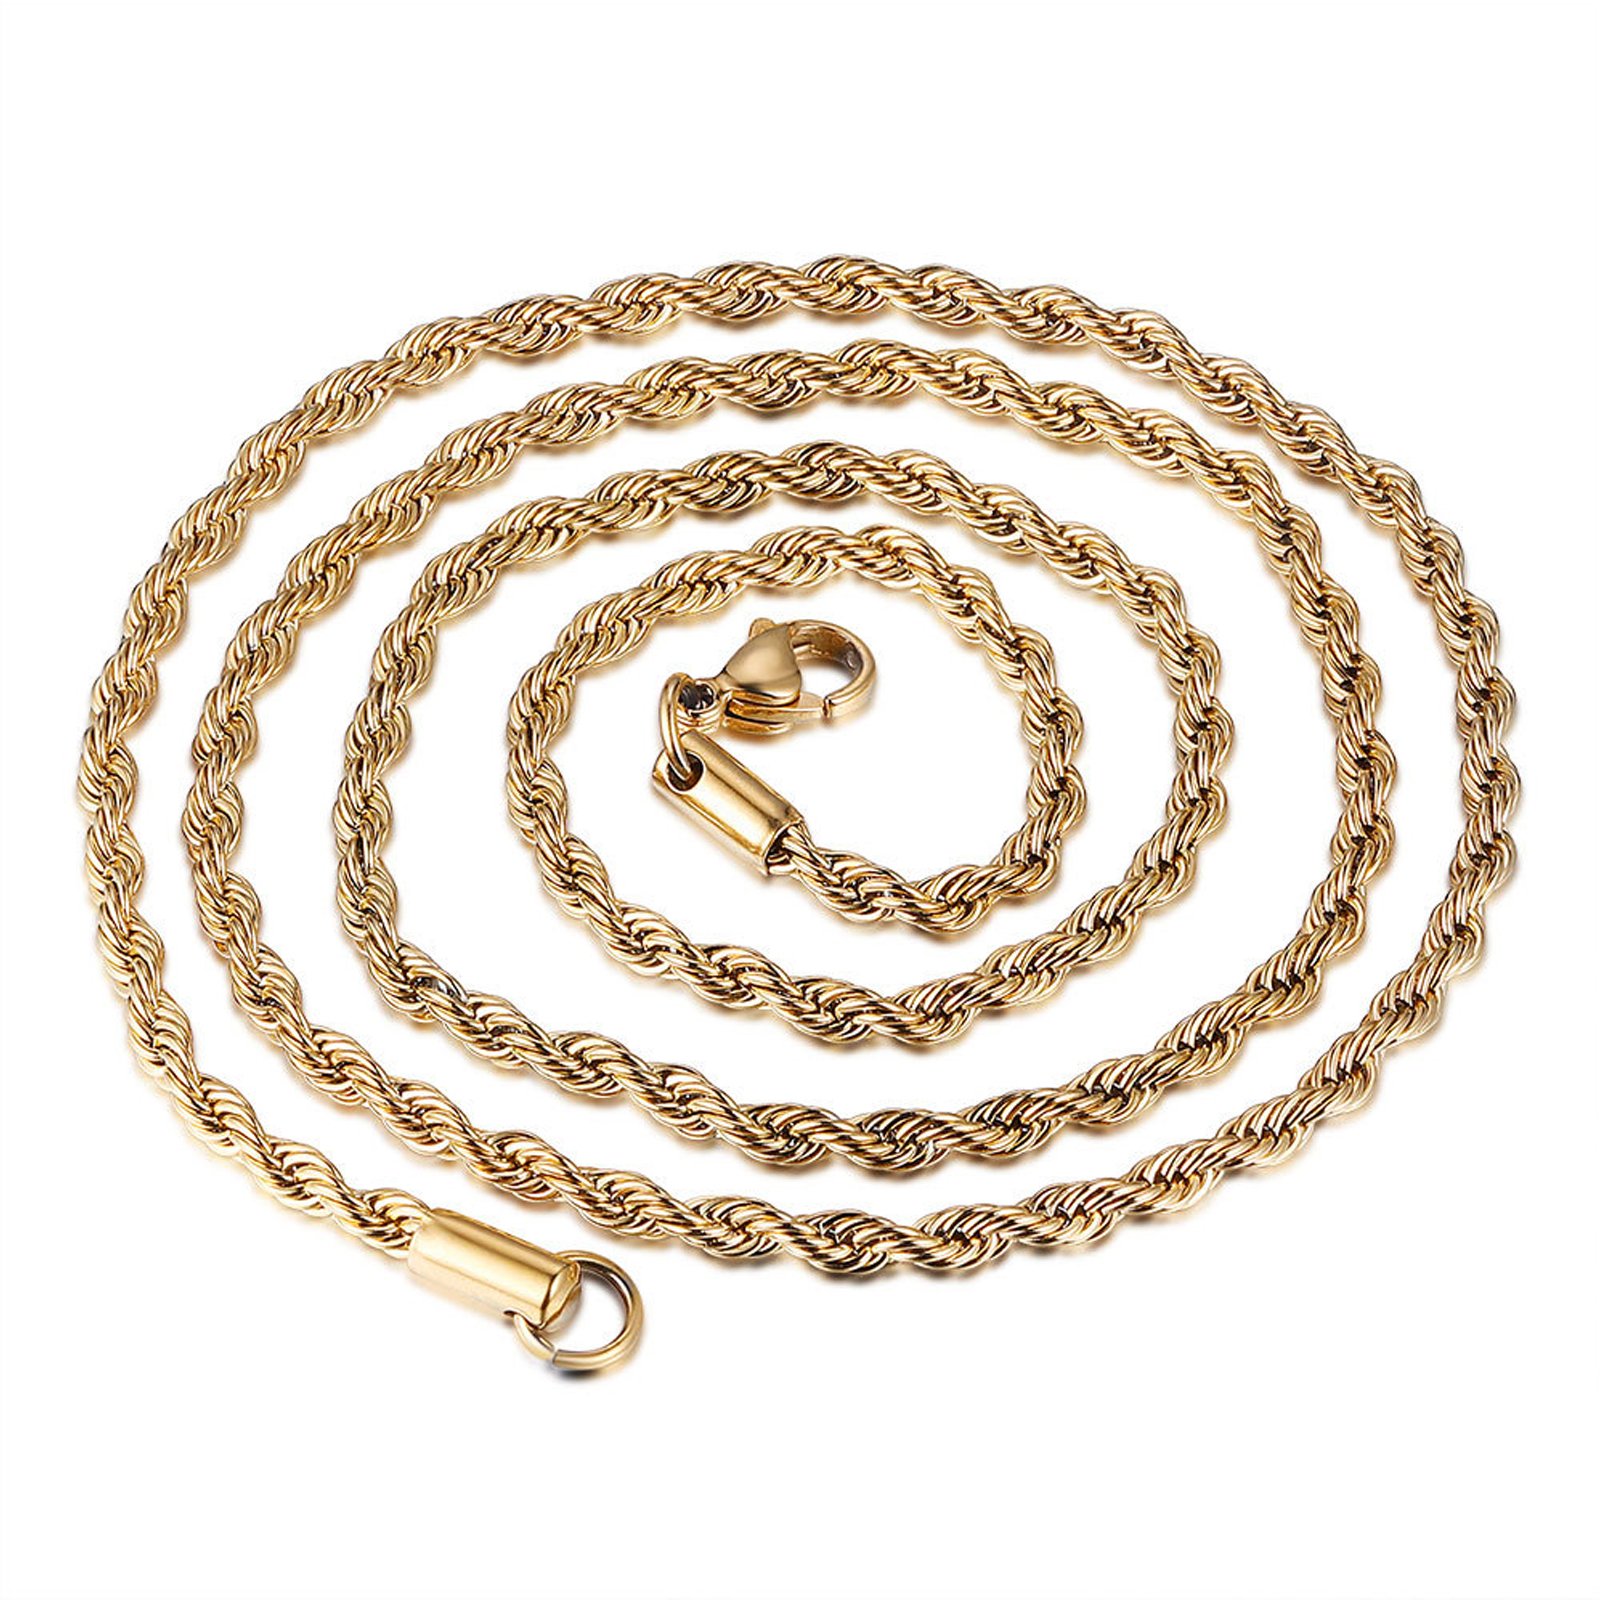 Picture of Stainless Steel Braided Rope Chain Necklace Gold Plated 46cm(18 1/8") long, 1 Piece